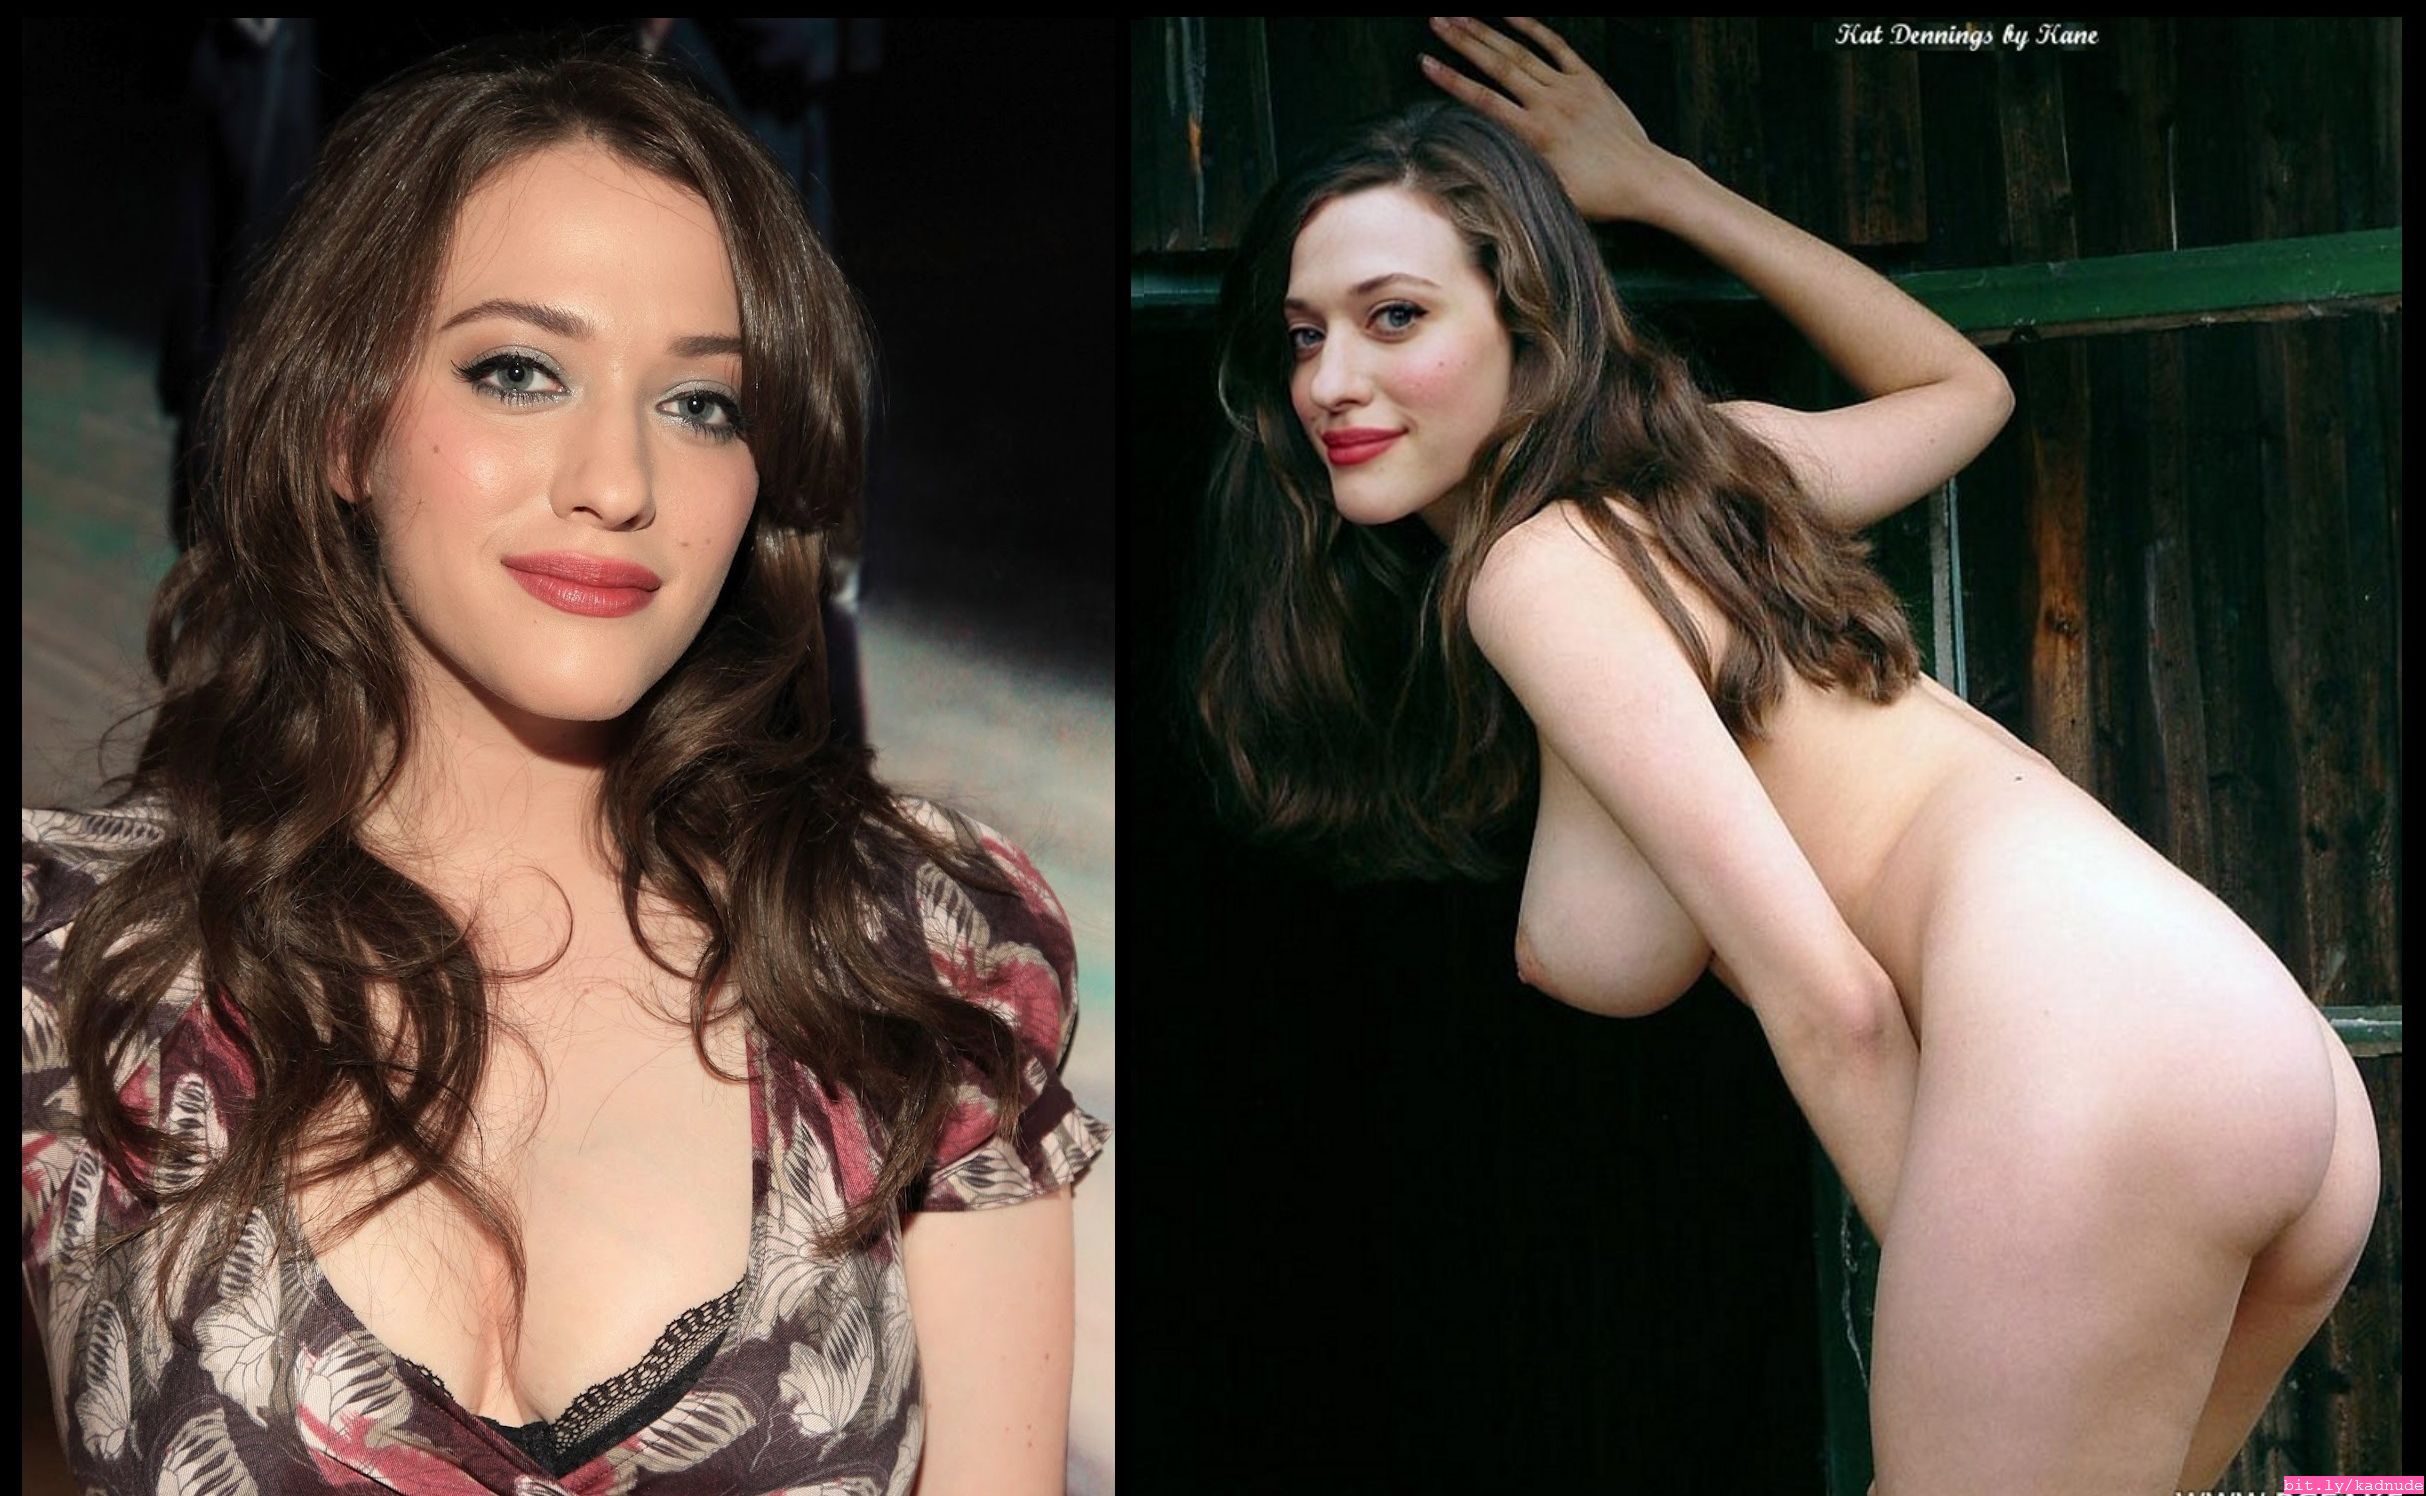 Dennings Nude Found - You Must See This! (WOW)